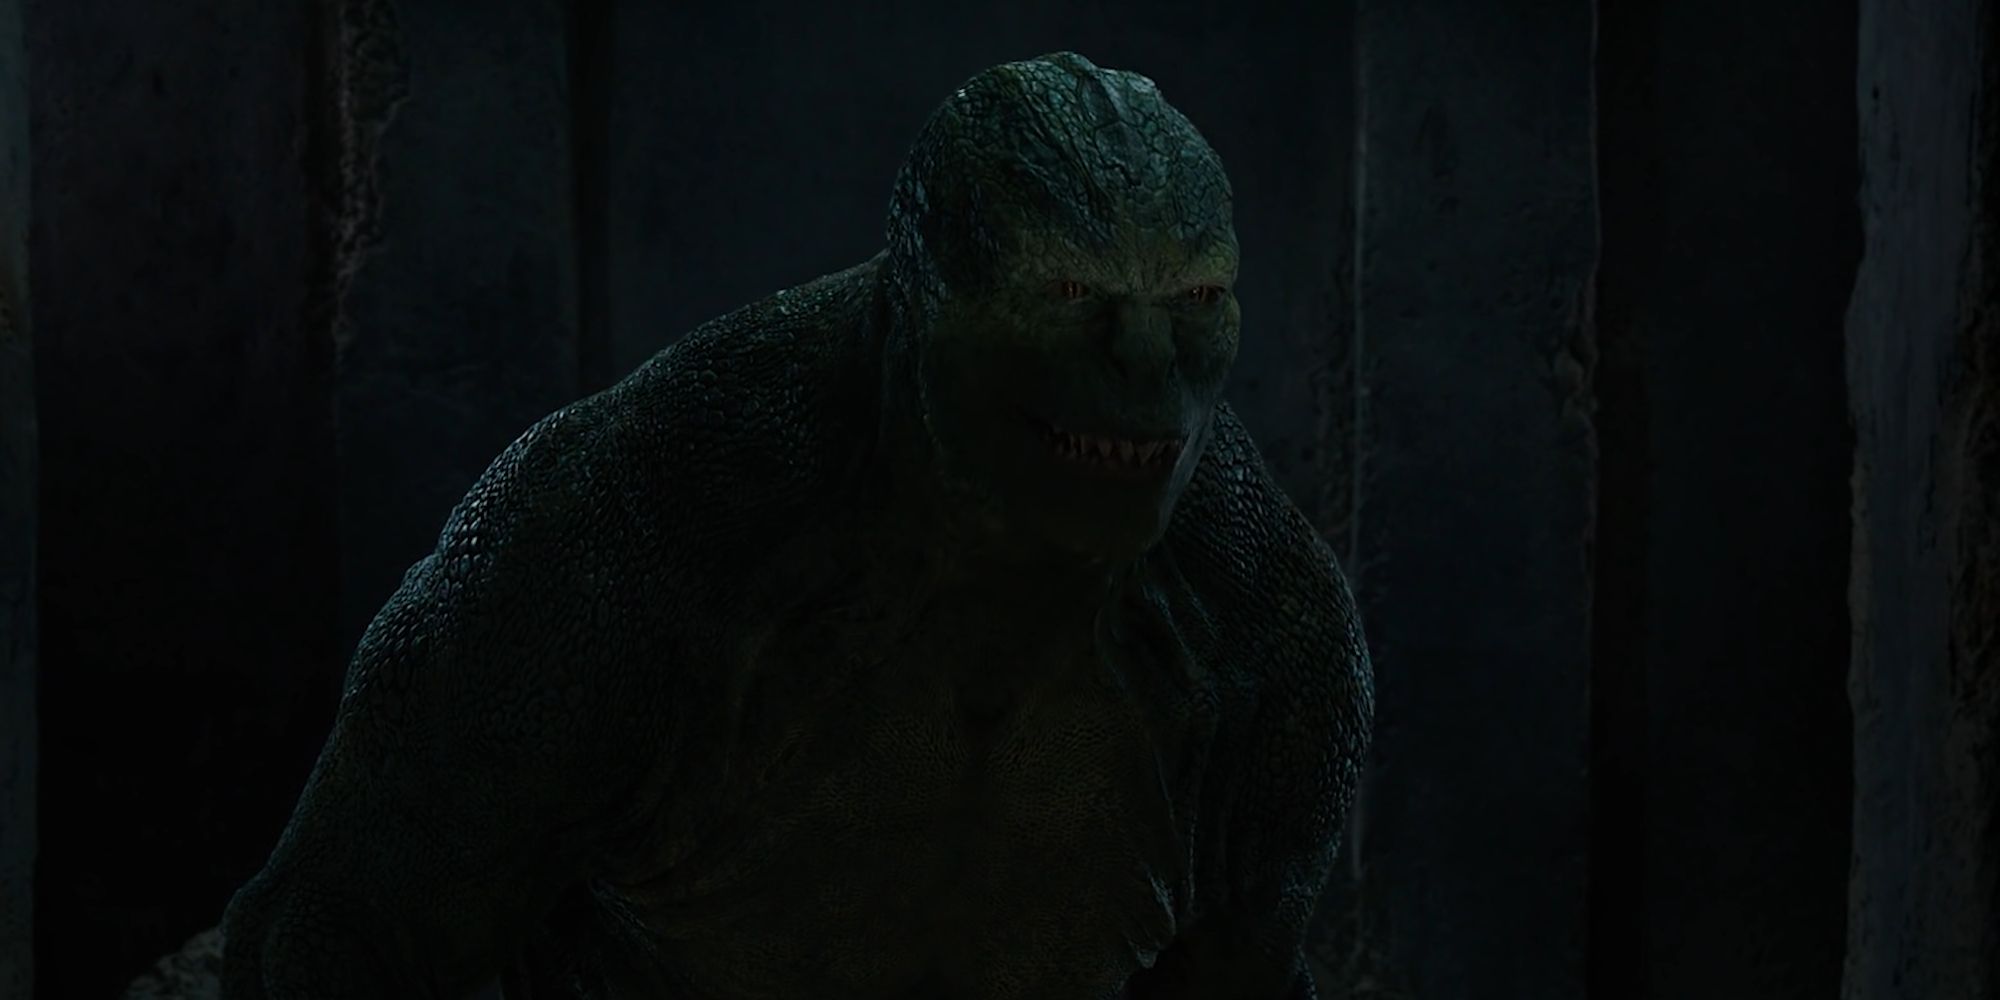 The Lizard in Doctor Strange's prison of the undercroft in Spider-Man No Way Home